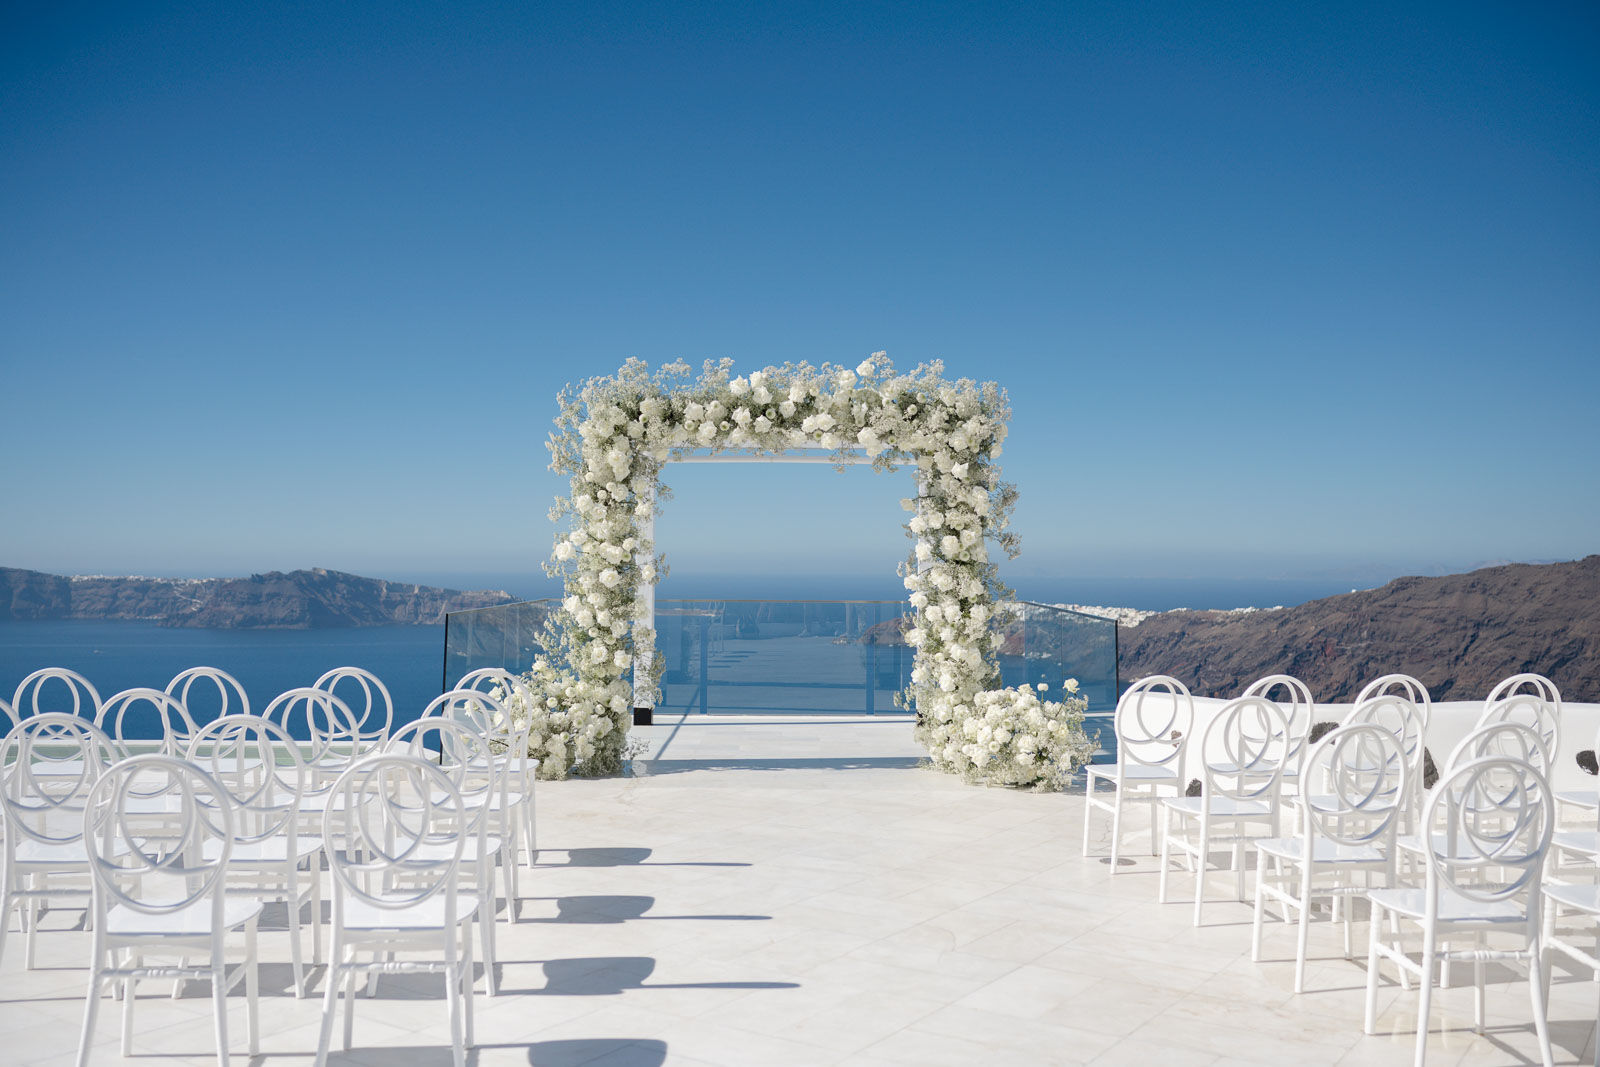 White and Green Floral Ceremony Arch overlooking the Caldera in Santorini, Greece.